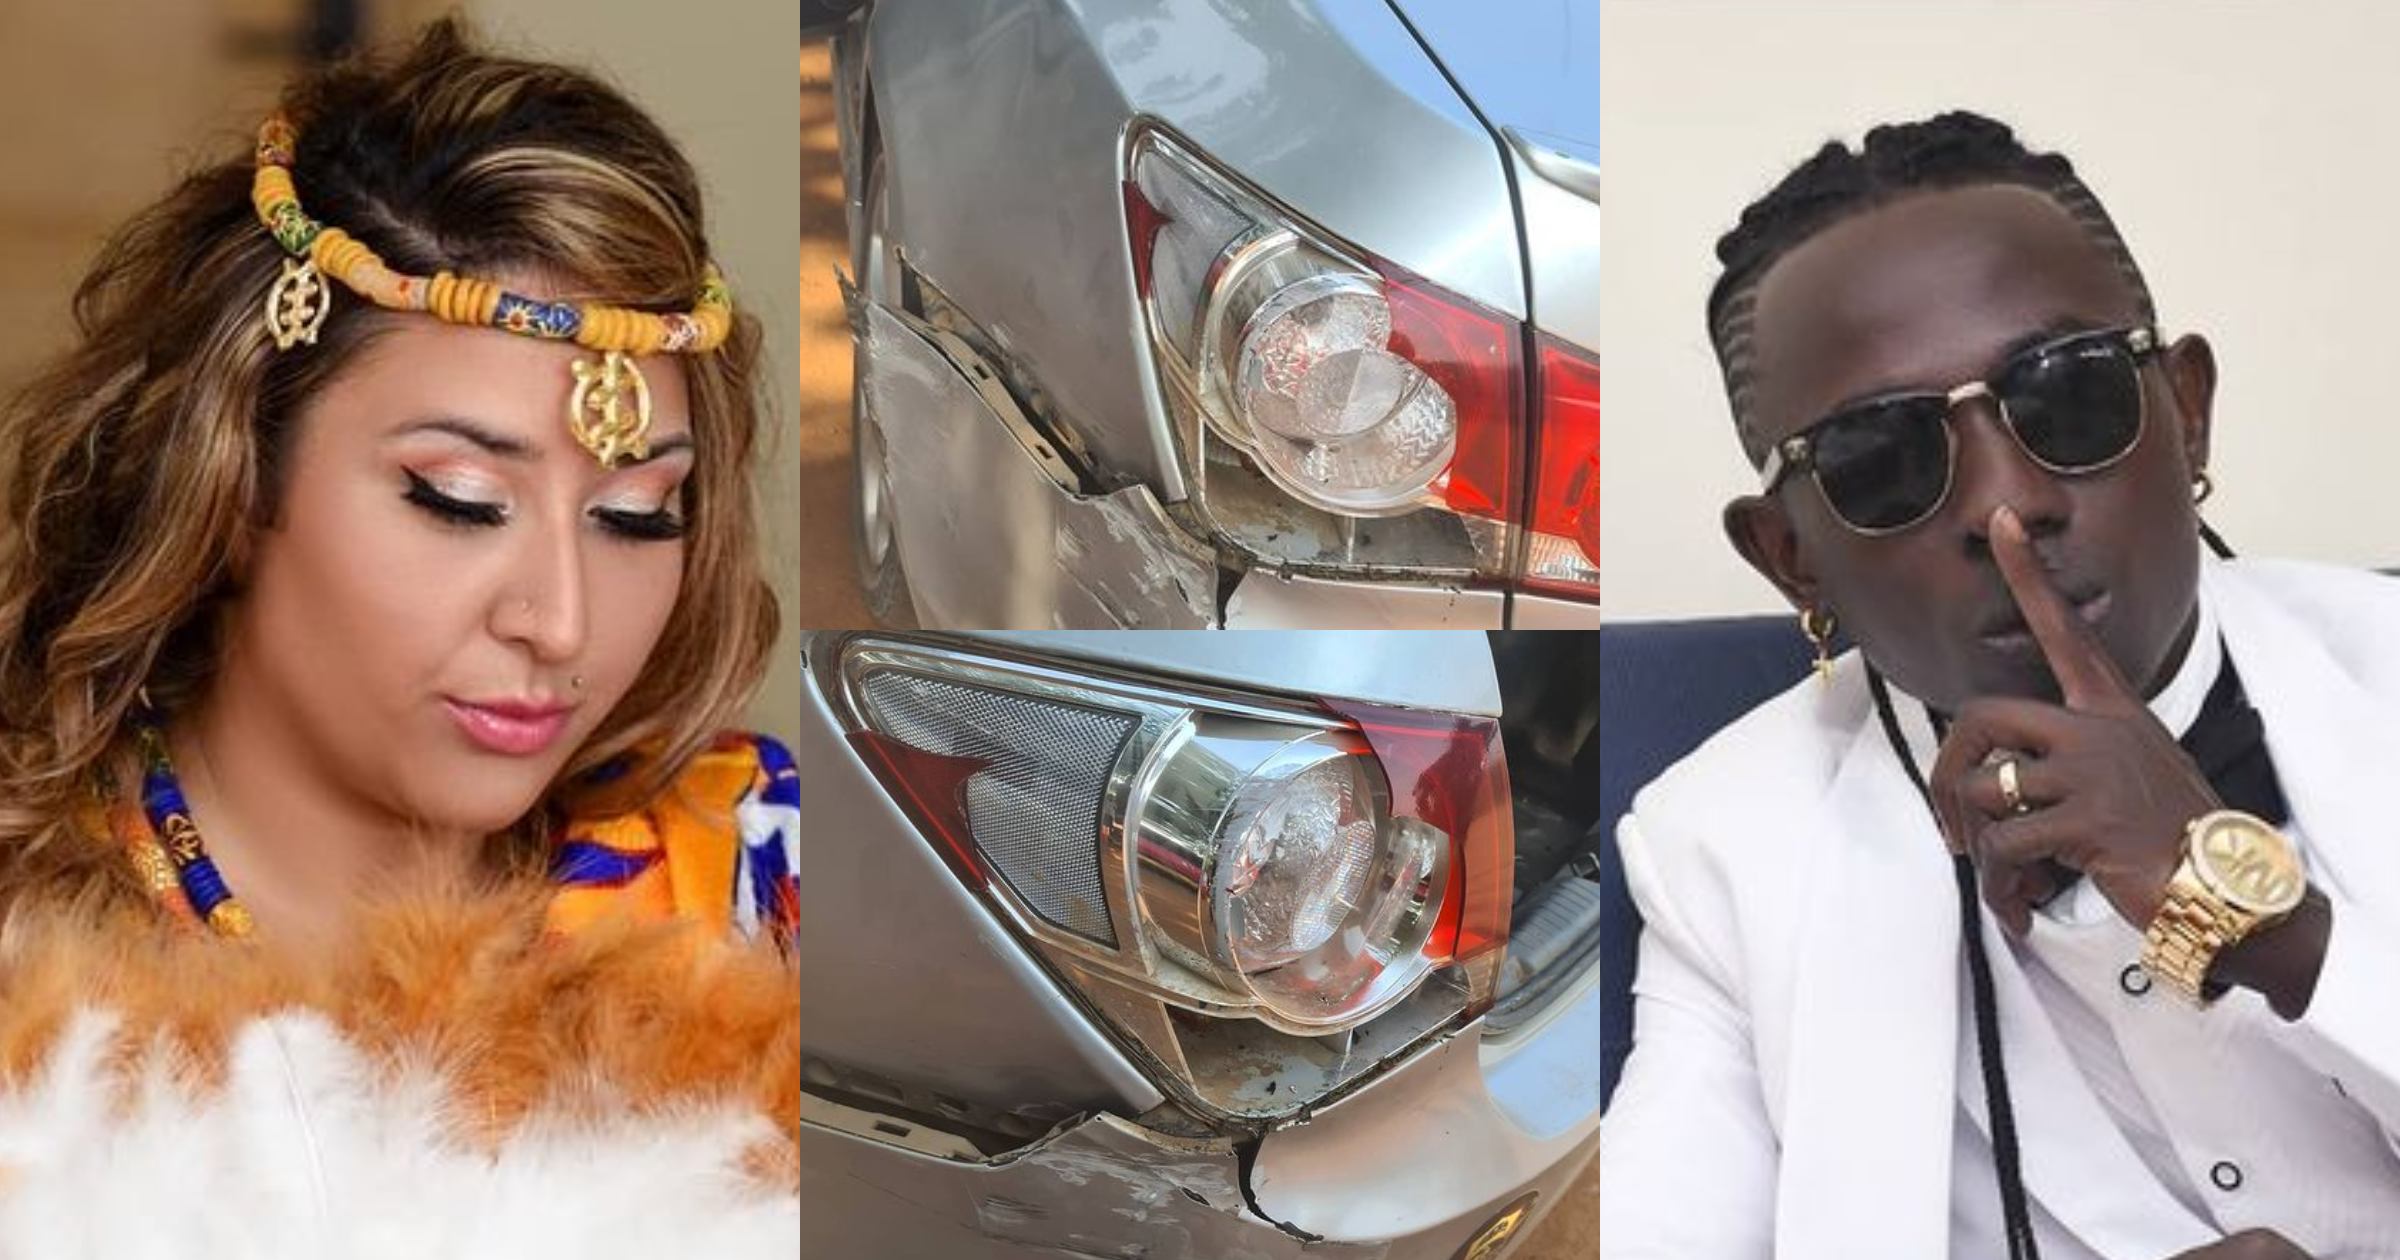 Patapaa and wife Liha Miller involved in accident; photos and video drop